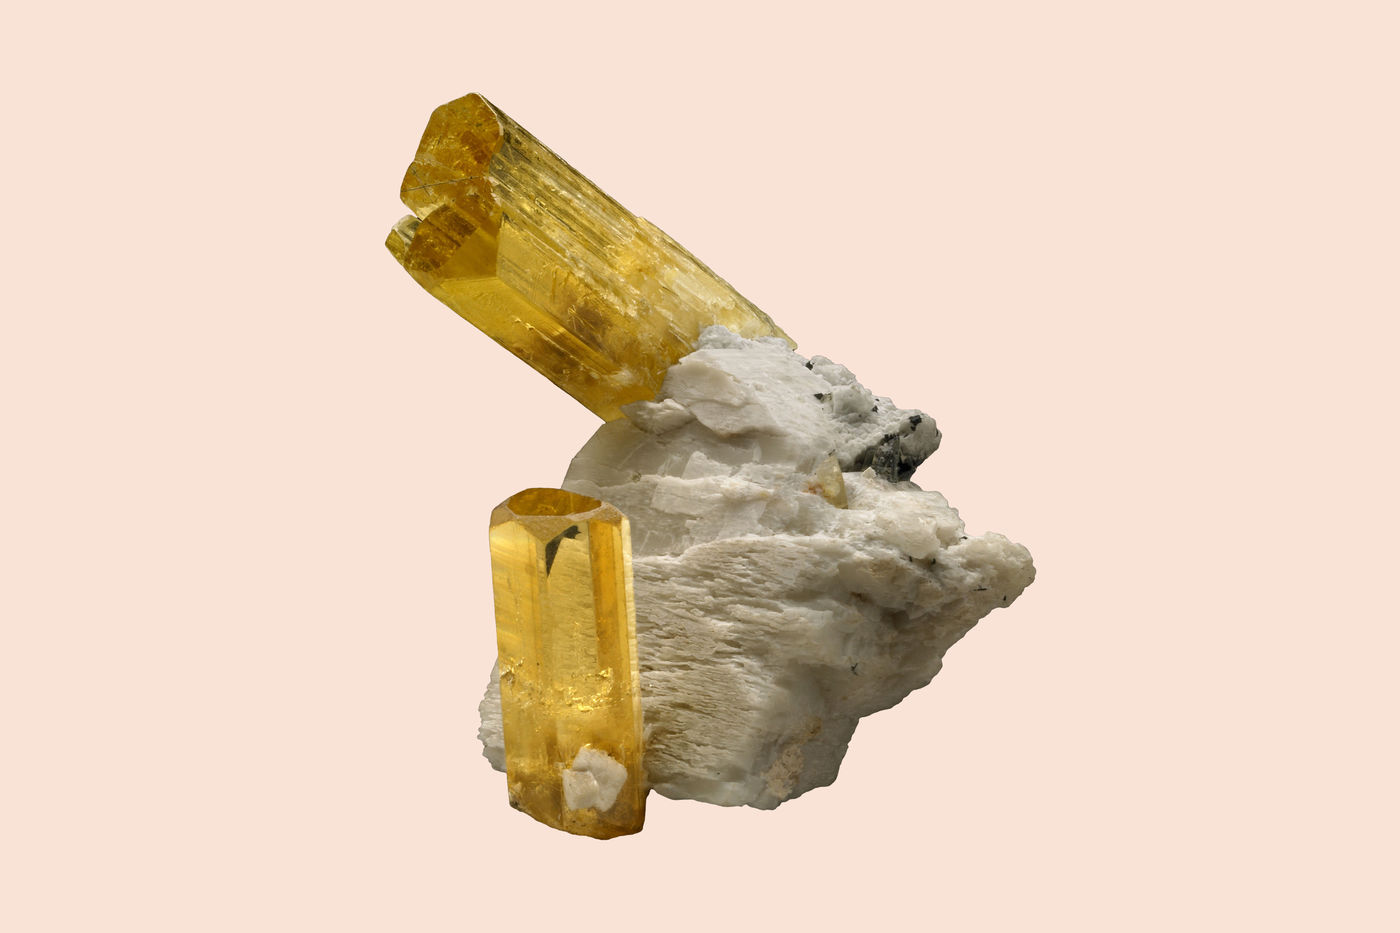 Natural crystals of heliodor from the Zelatoya Vata mine in Tajikistan. The largest crystal is 68 mm long.